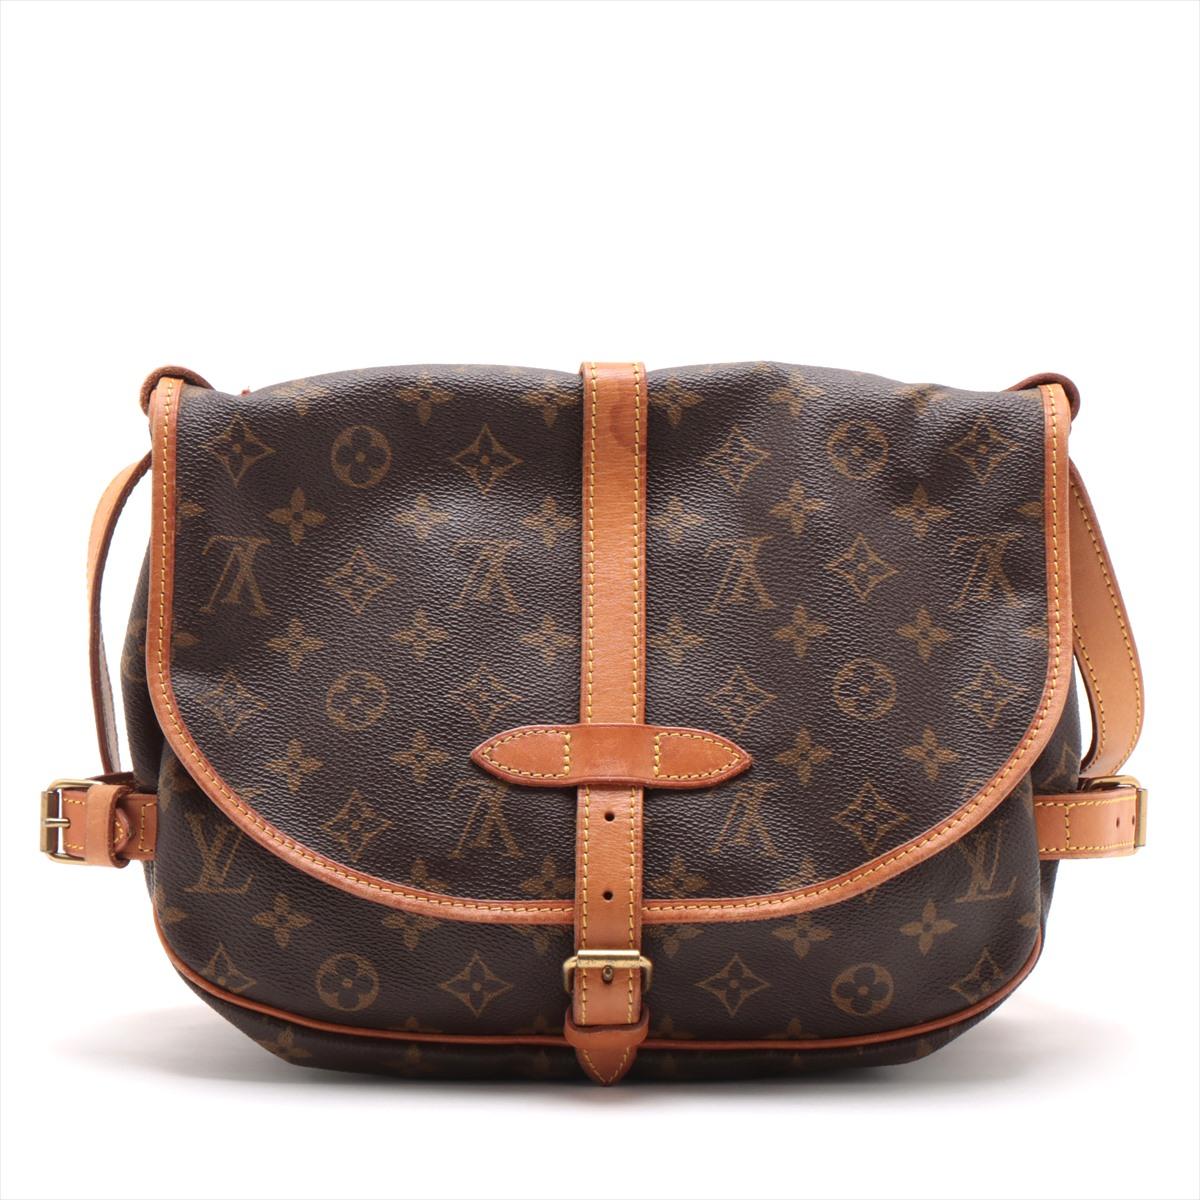 Louis Vuitton Monogram Saumur 30 In Good Condition For Sale In Indianapolis, IN